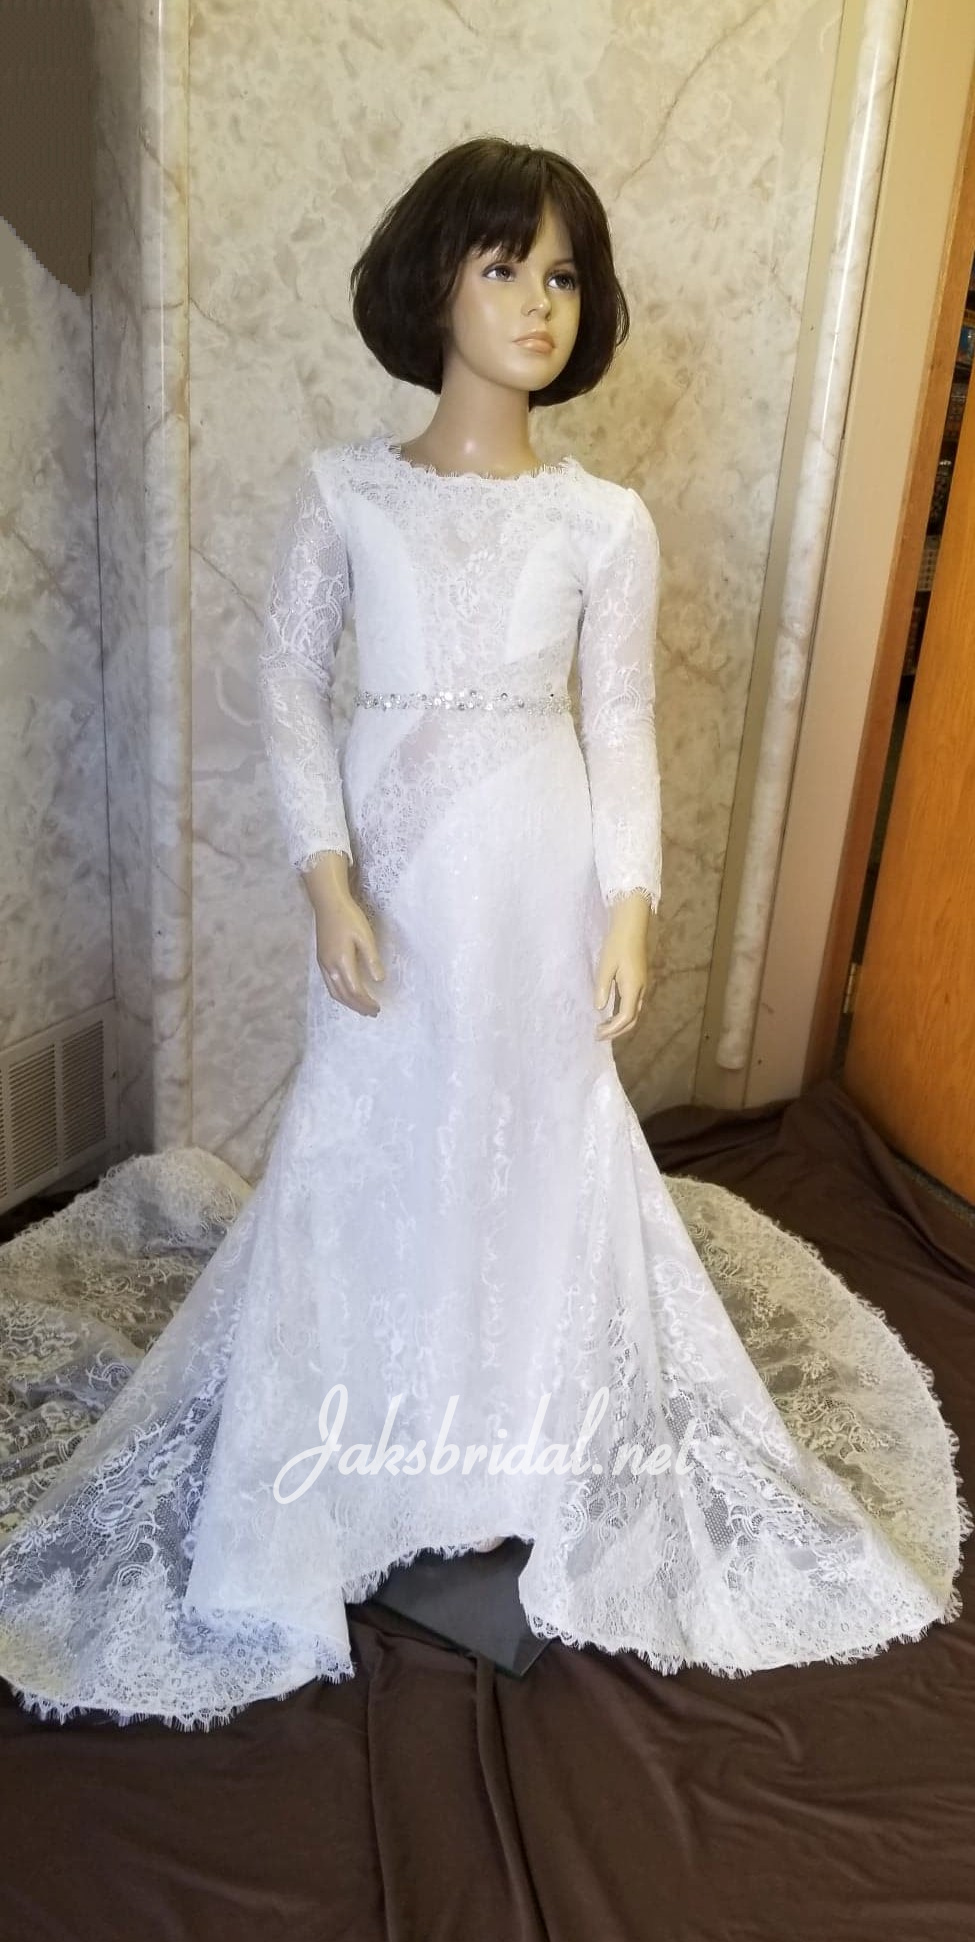 Long sleeve flower girl dress in lace and sequins, illusion sleeves, neck, back and train